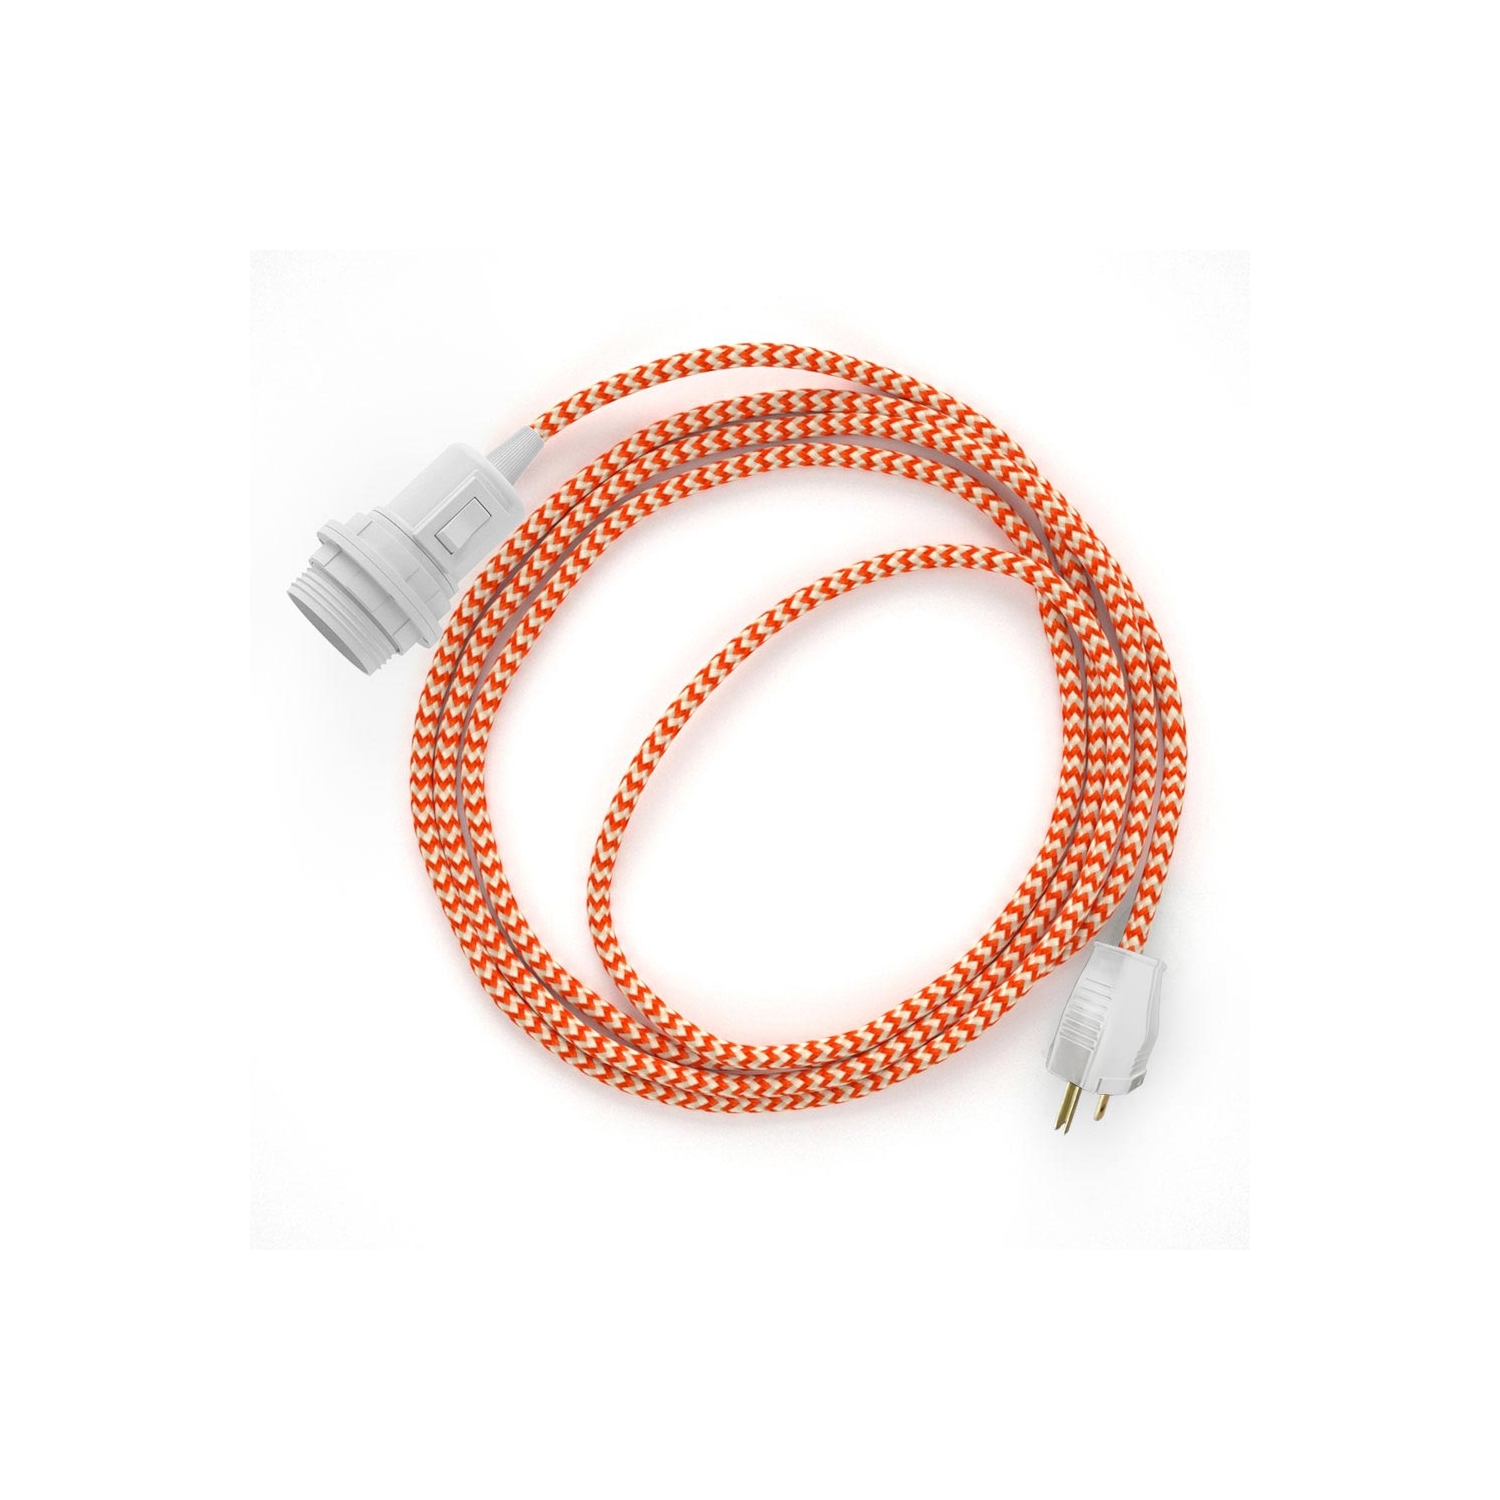 Plug-in Pendant for Lampshade with switch on socket | RZ15 Orange & White Chevron